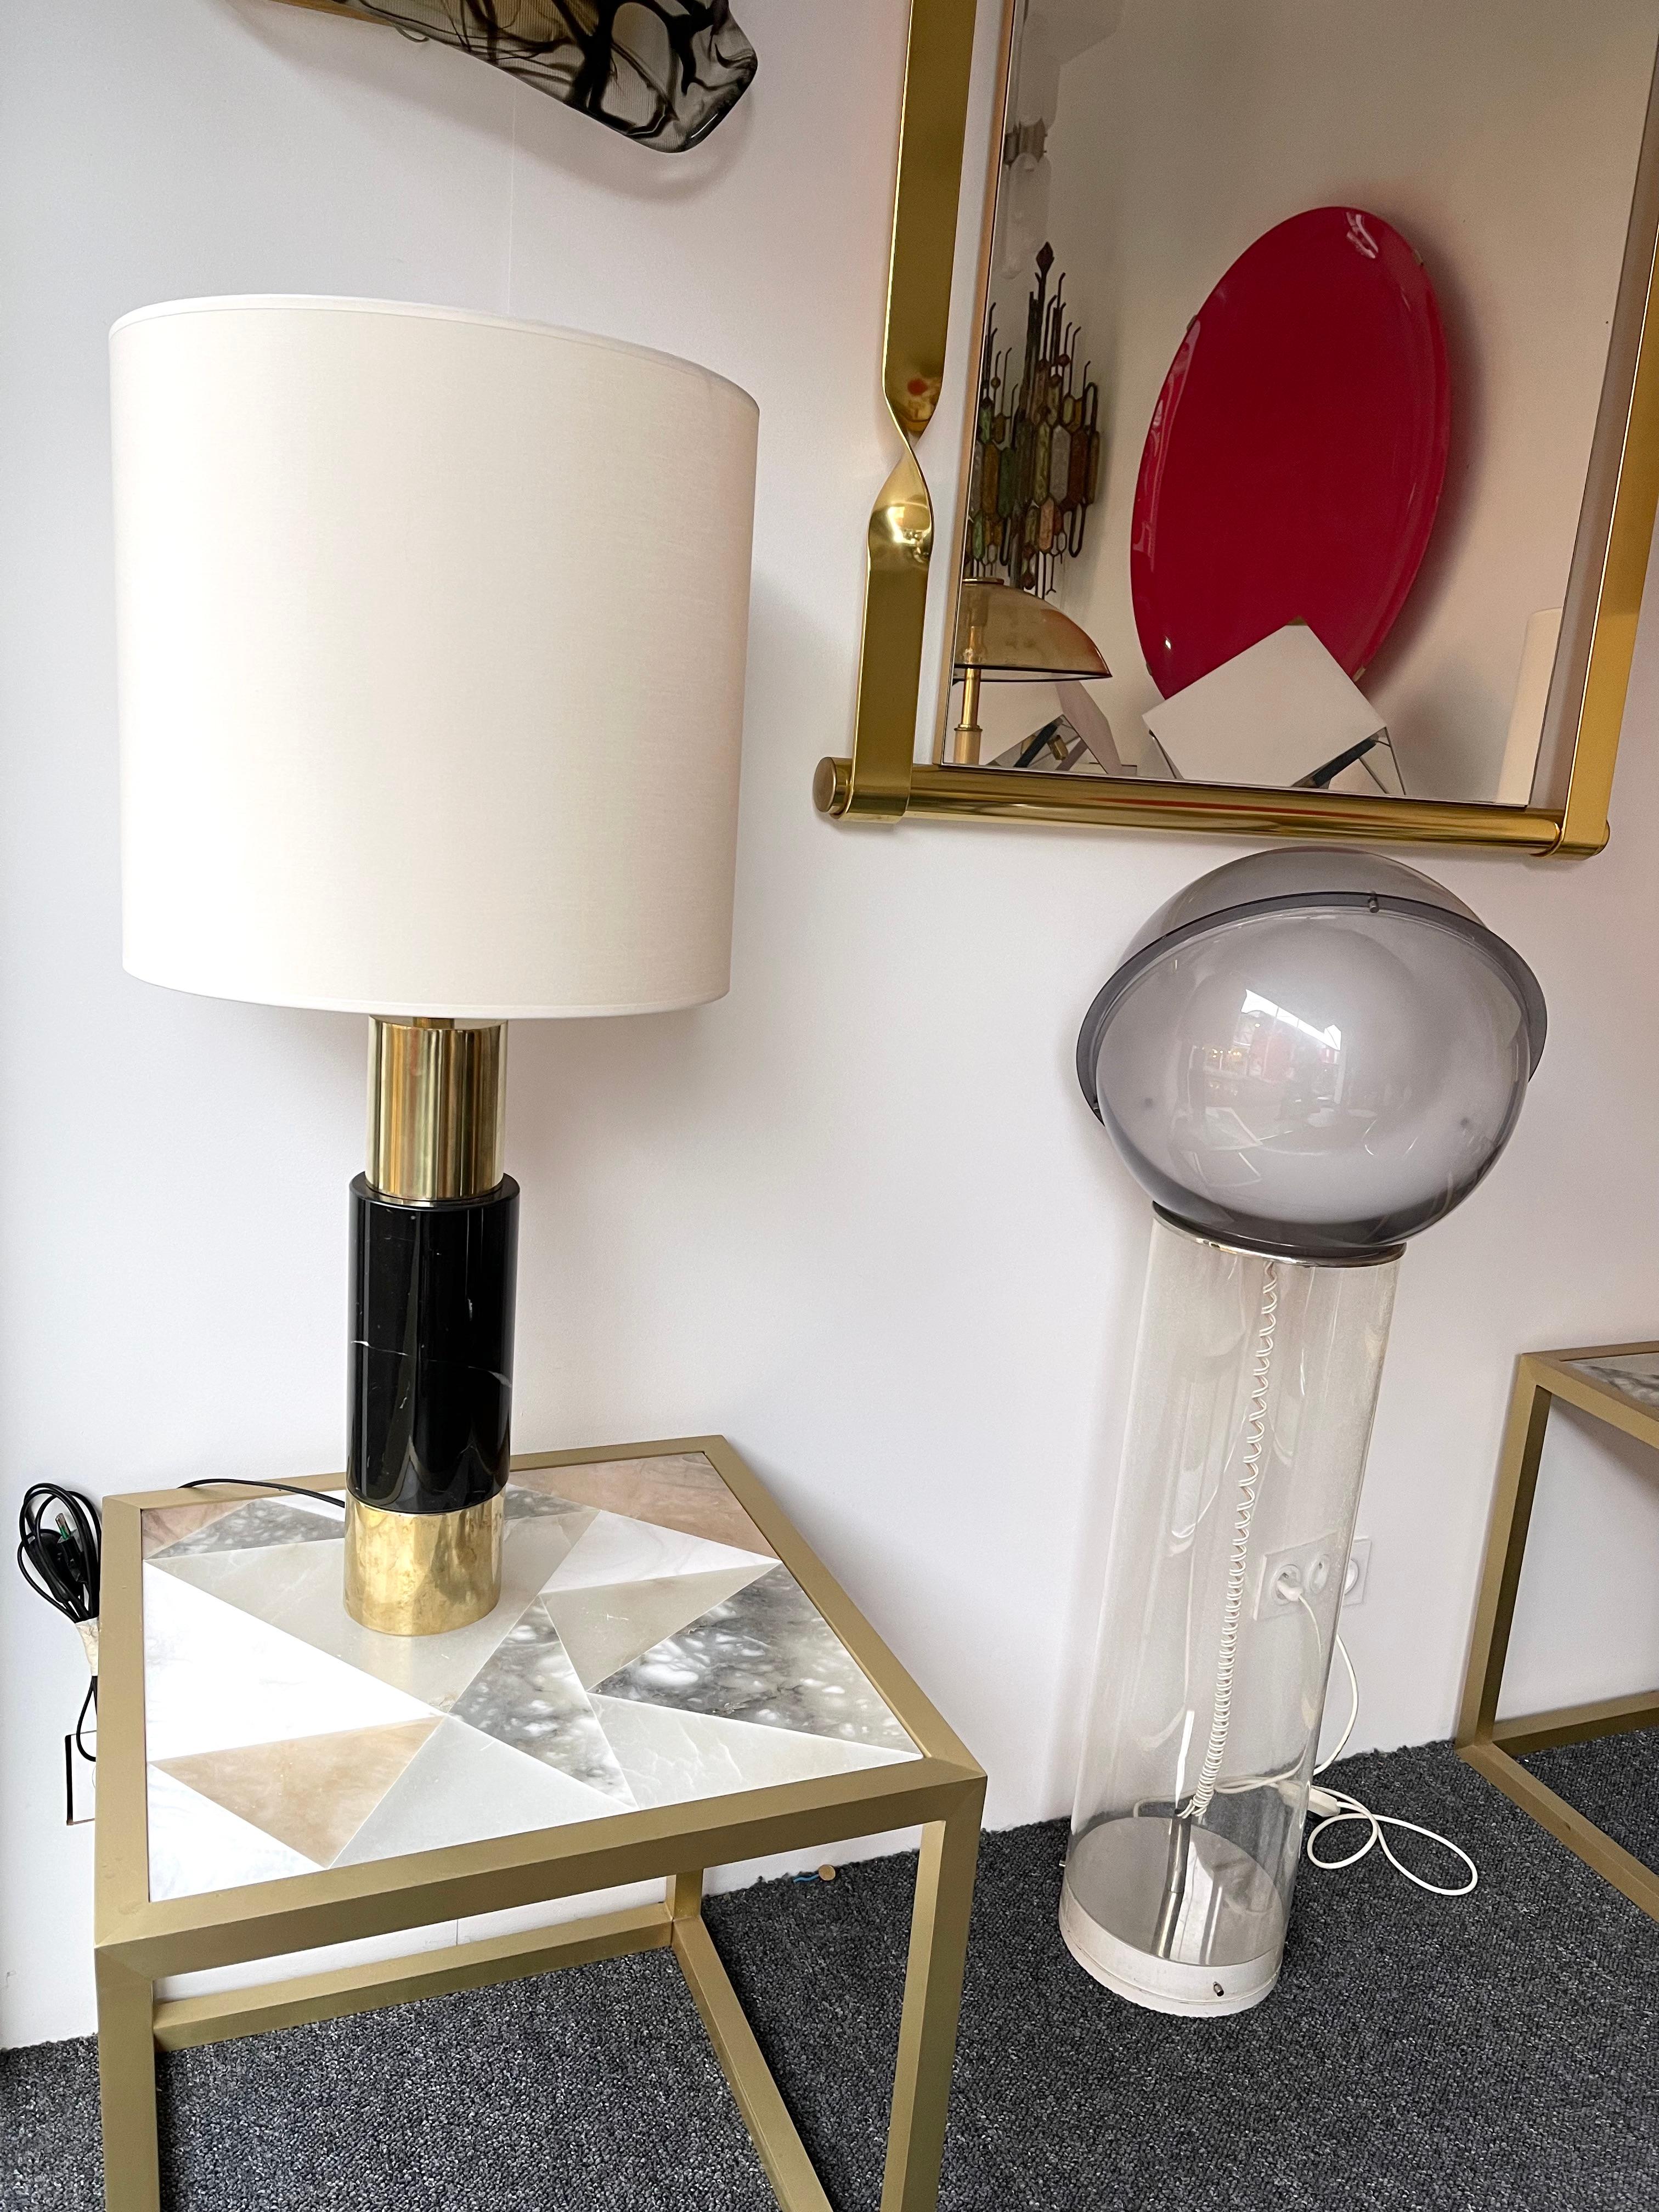 Pair of contemporary table or bedside lamps brass and massive body in black marble stone a variant like granite or travertine. Few exclusive production from a small italian design workshop. In the style of Mazzega, Veronese, Poliarte, Venini,